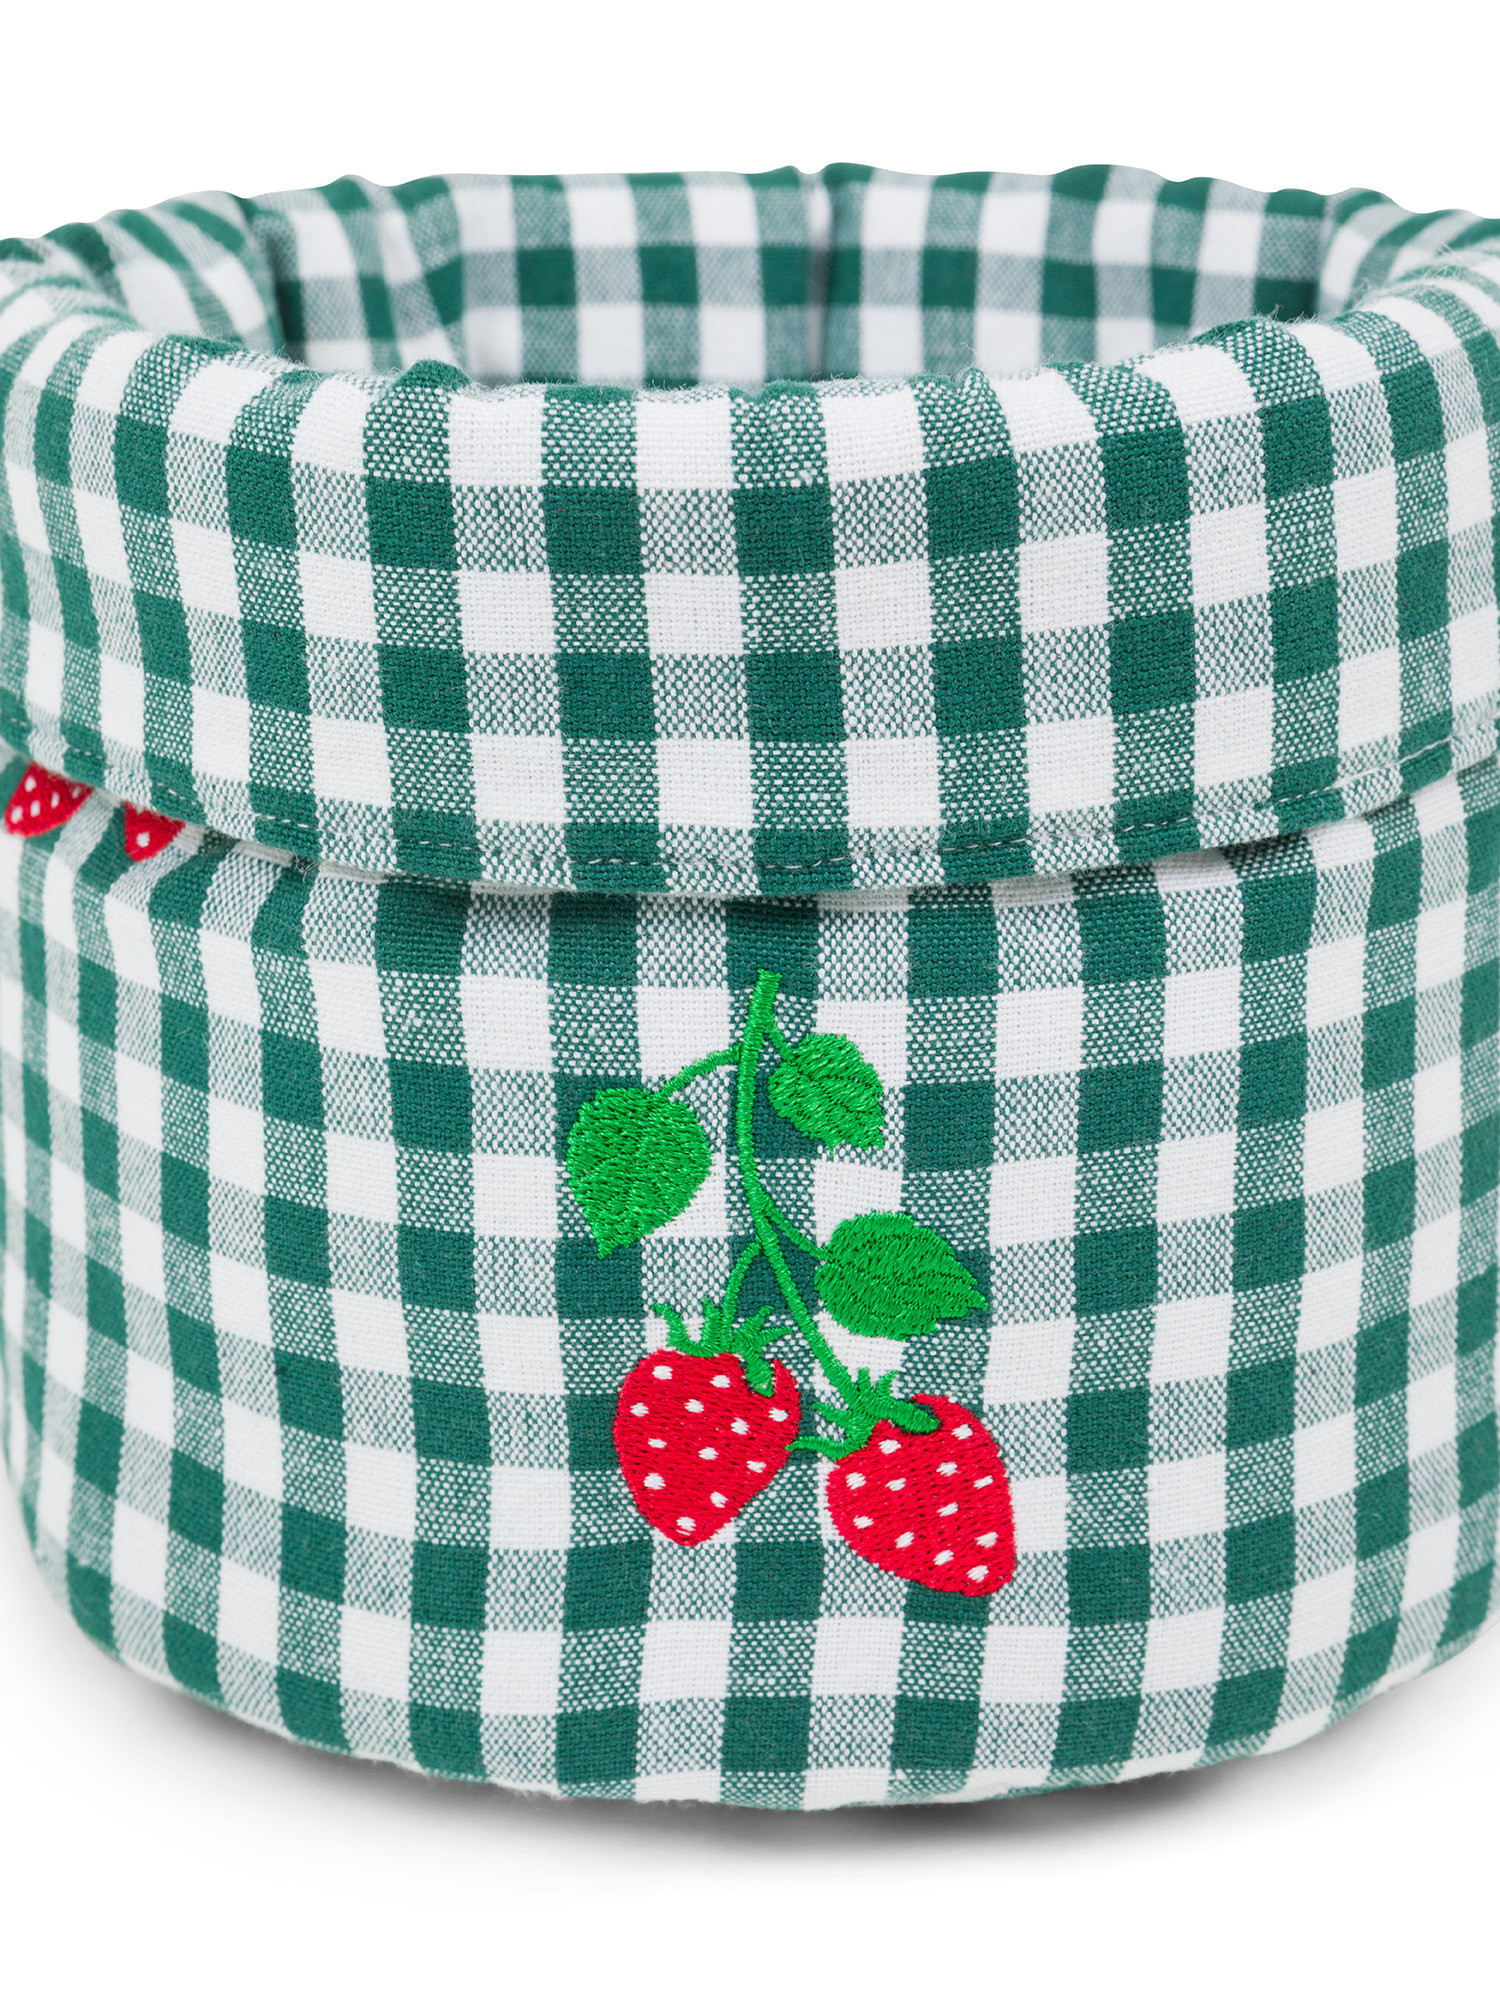 Vichy cotton storage basket with strawberry embroidery, Dark Green, large image number 1